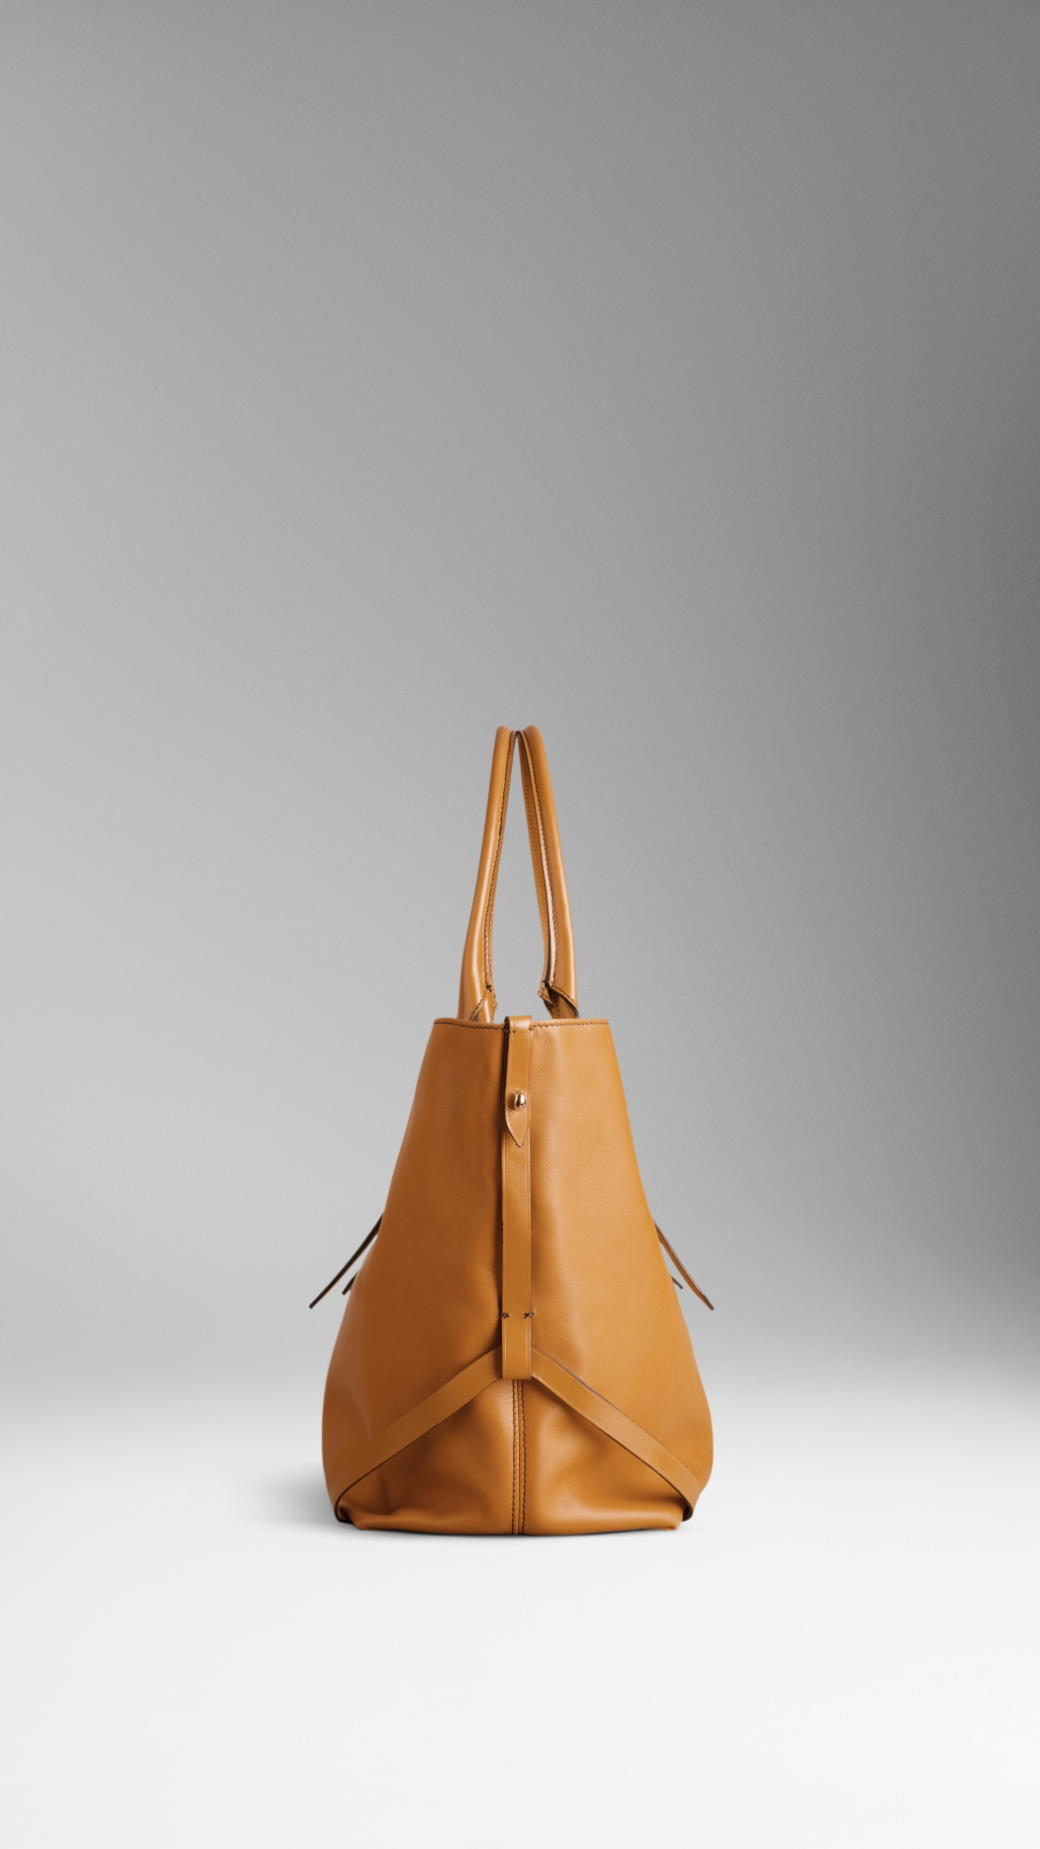 Burberry Medium Nappa Leather Tote Bag in Brown - Lyst